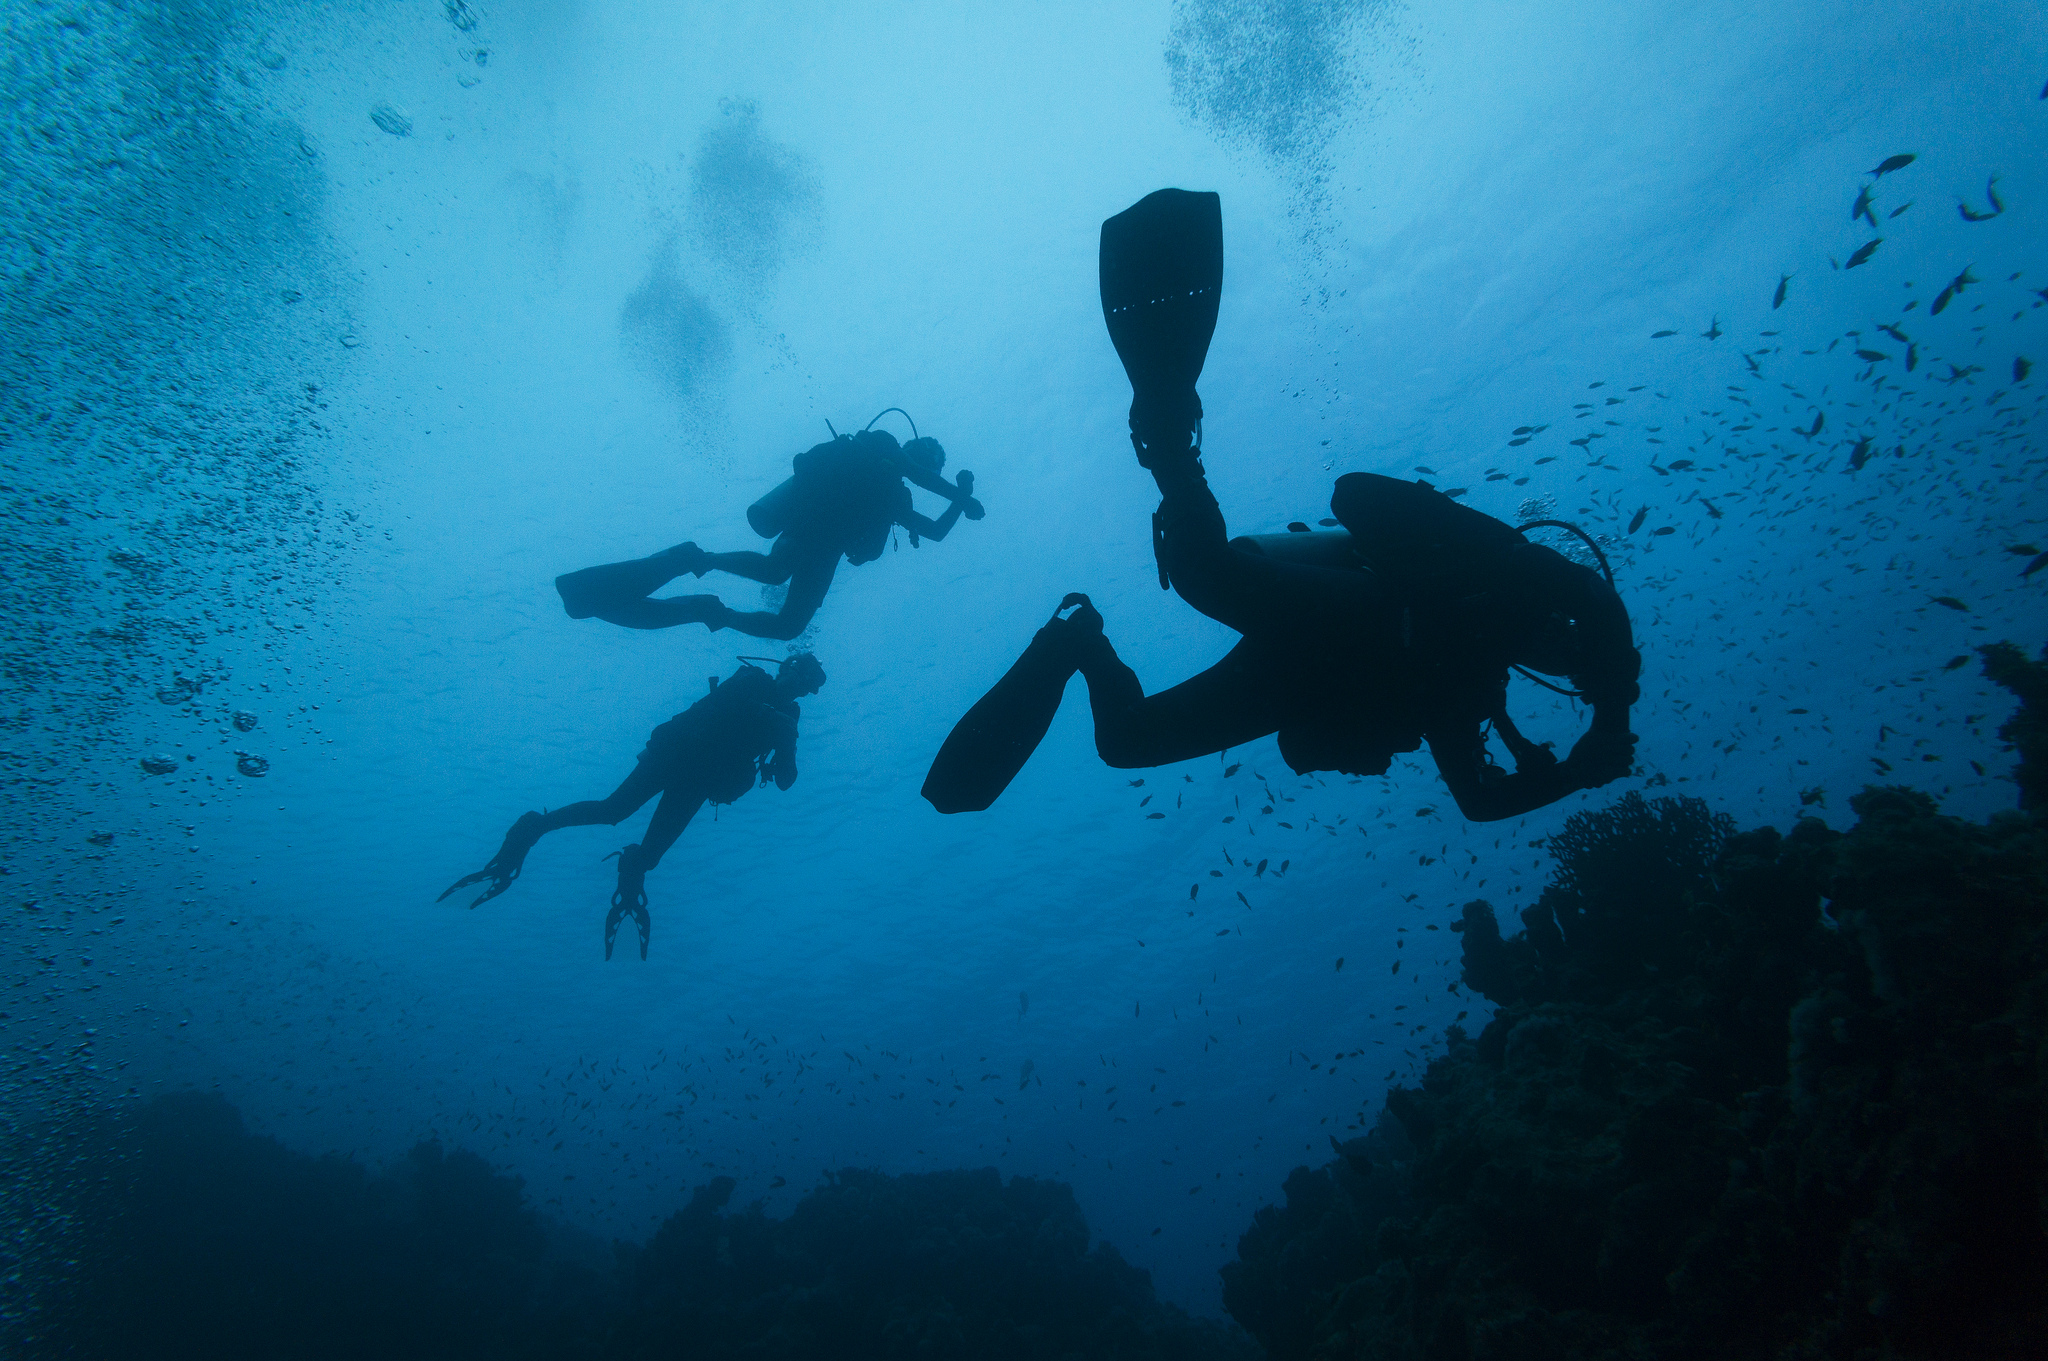 Scuba diving is one of the many thrilling water sports to try in New England.